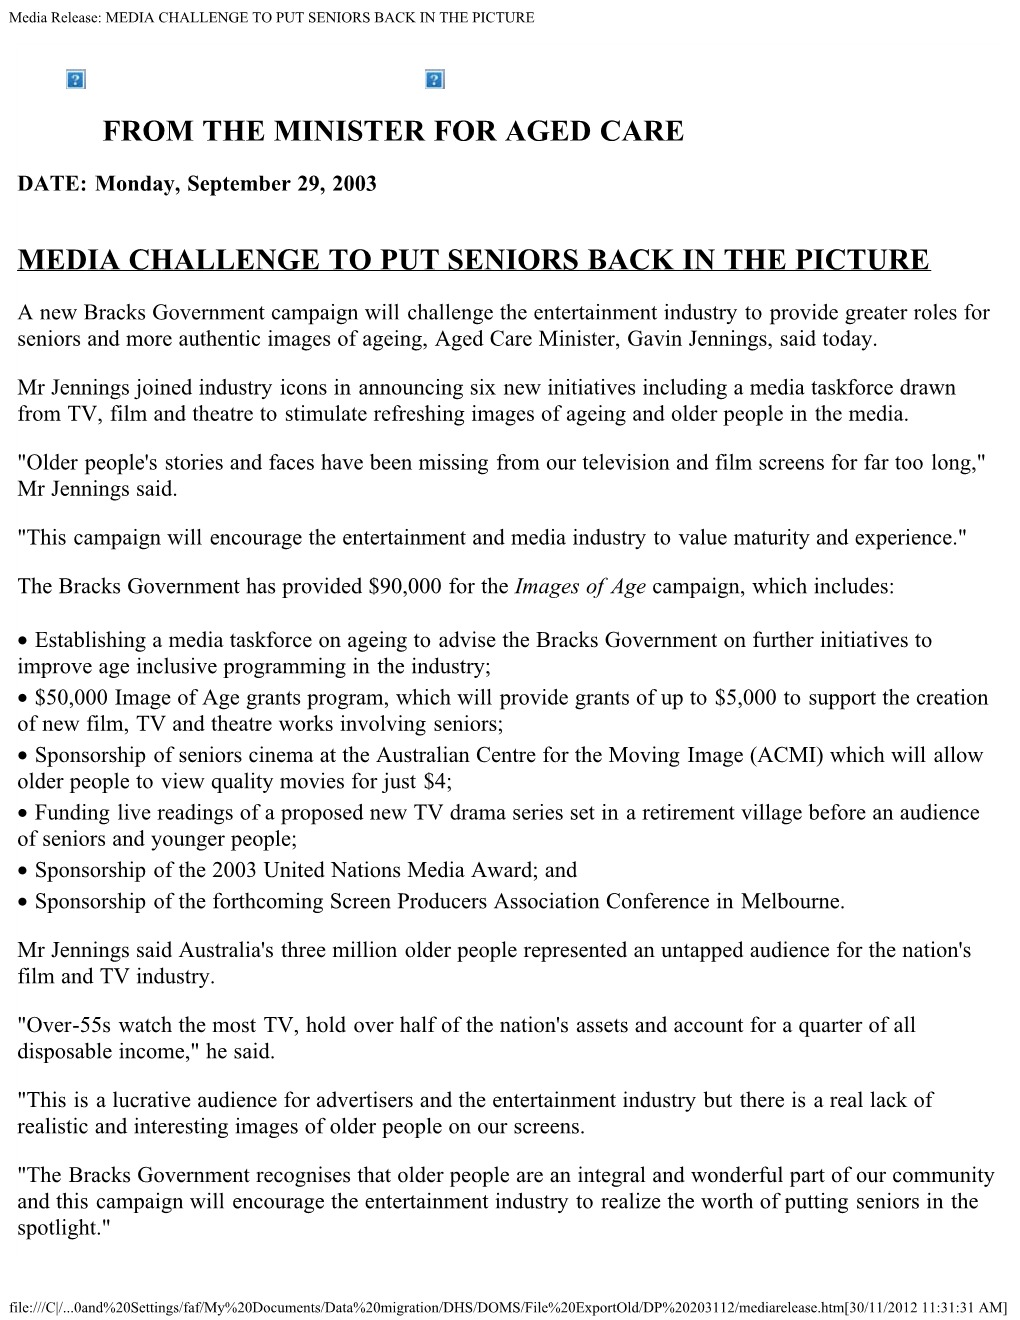 From the Minister for Aged Care Media Challenge To